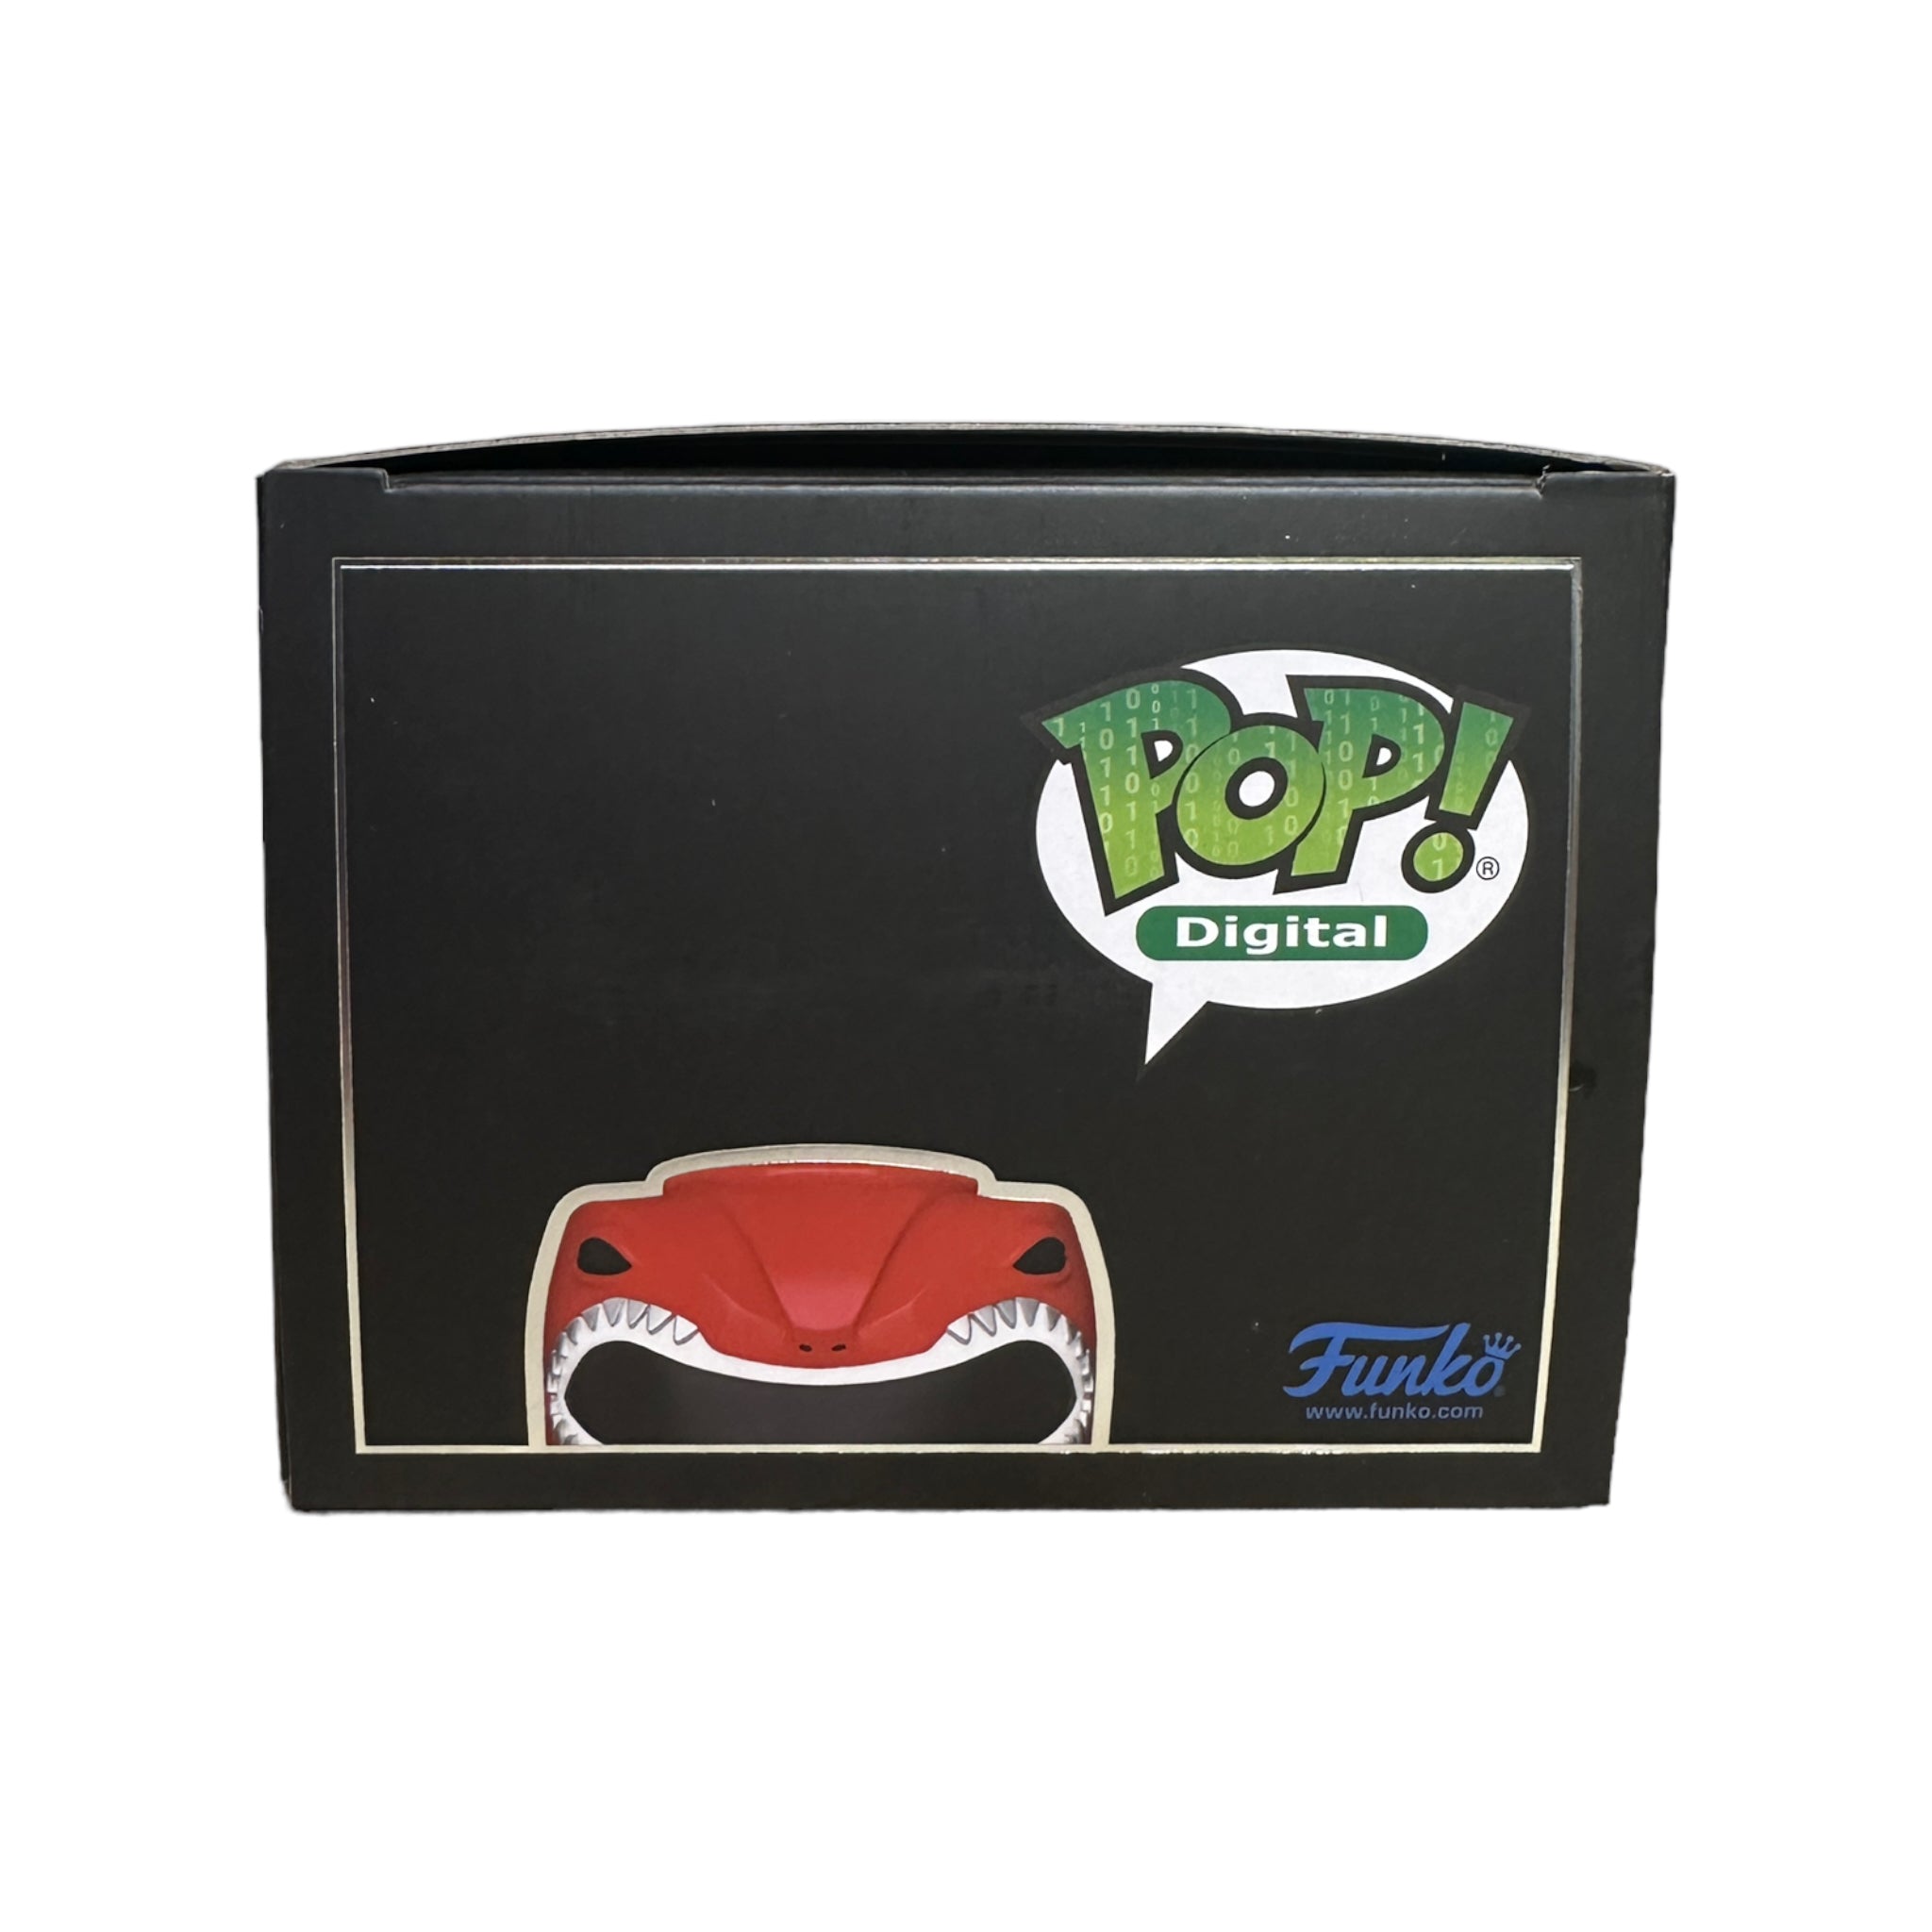 Red Ranger Dragon Shield, Power Sword and Dragon Dagger #76 Funko Pop! - Mighty Morphin Power Rangers - NFT Release Exclusive LE1875 Pcs - Condition 9.5/10